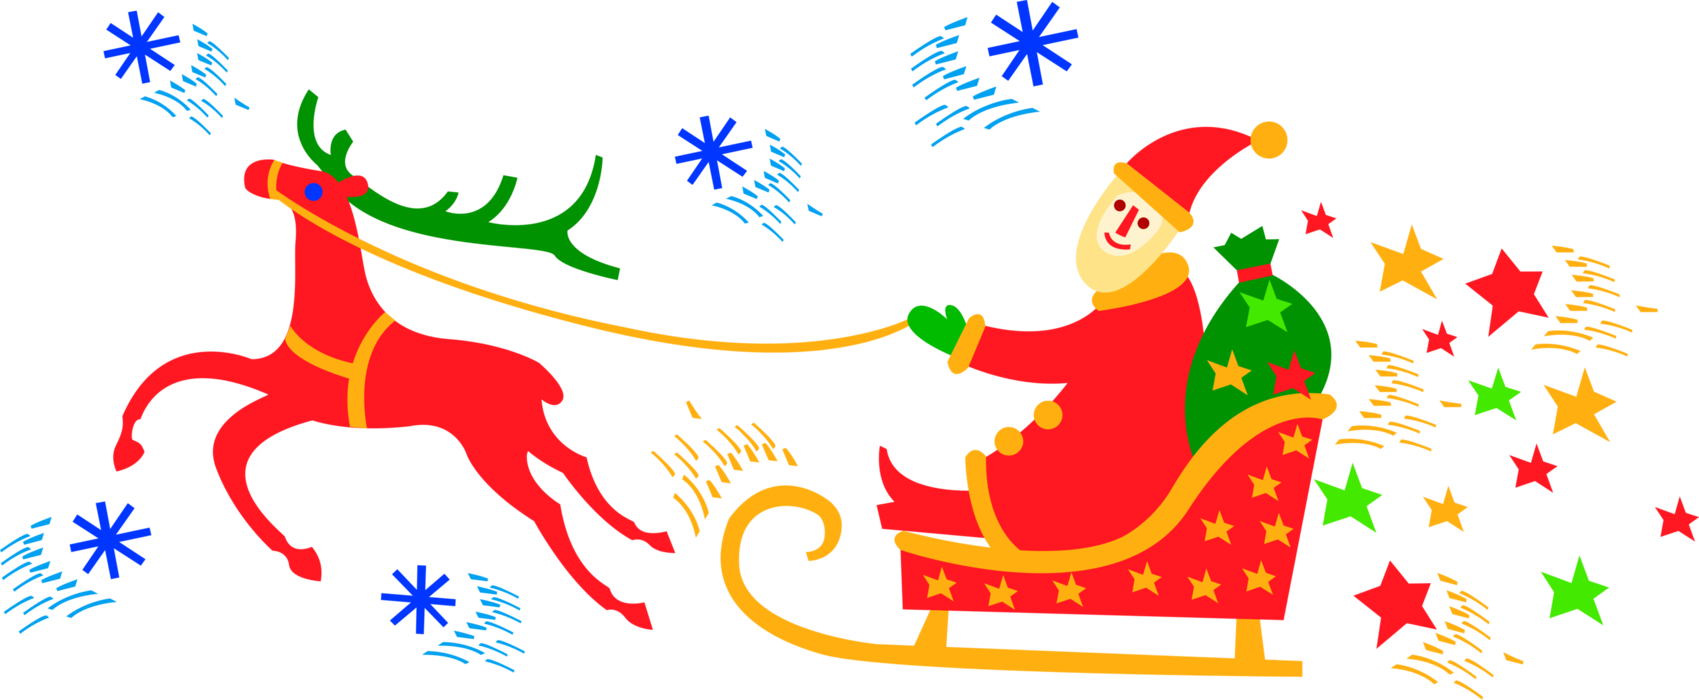 Vector Illustration of Santa Claus in Sleigh with Gifts and Reindeer